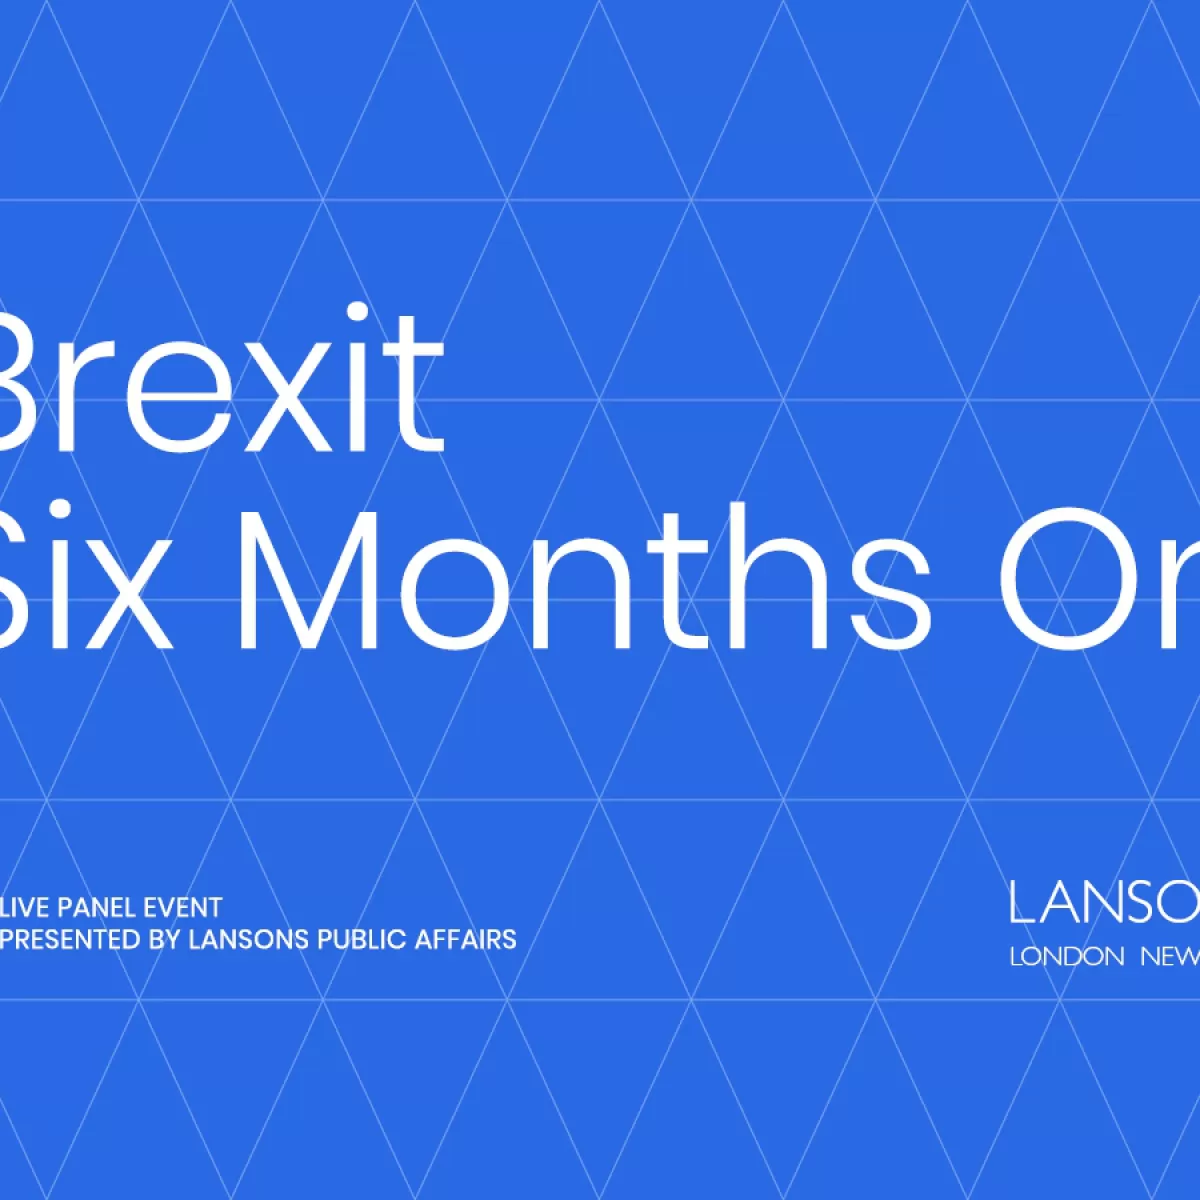 Brexit Six Months On Event by Lansons London New York 1200x900 2021 06 02 112408